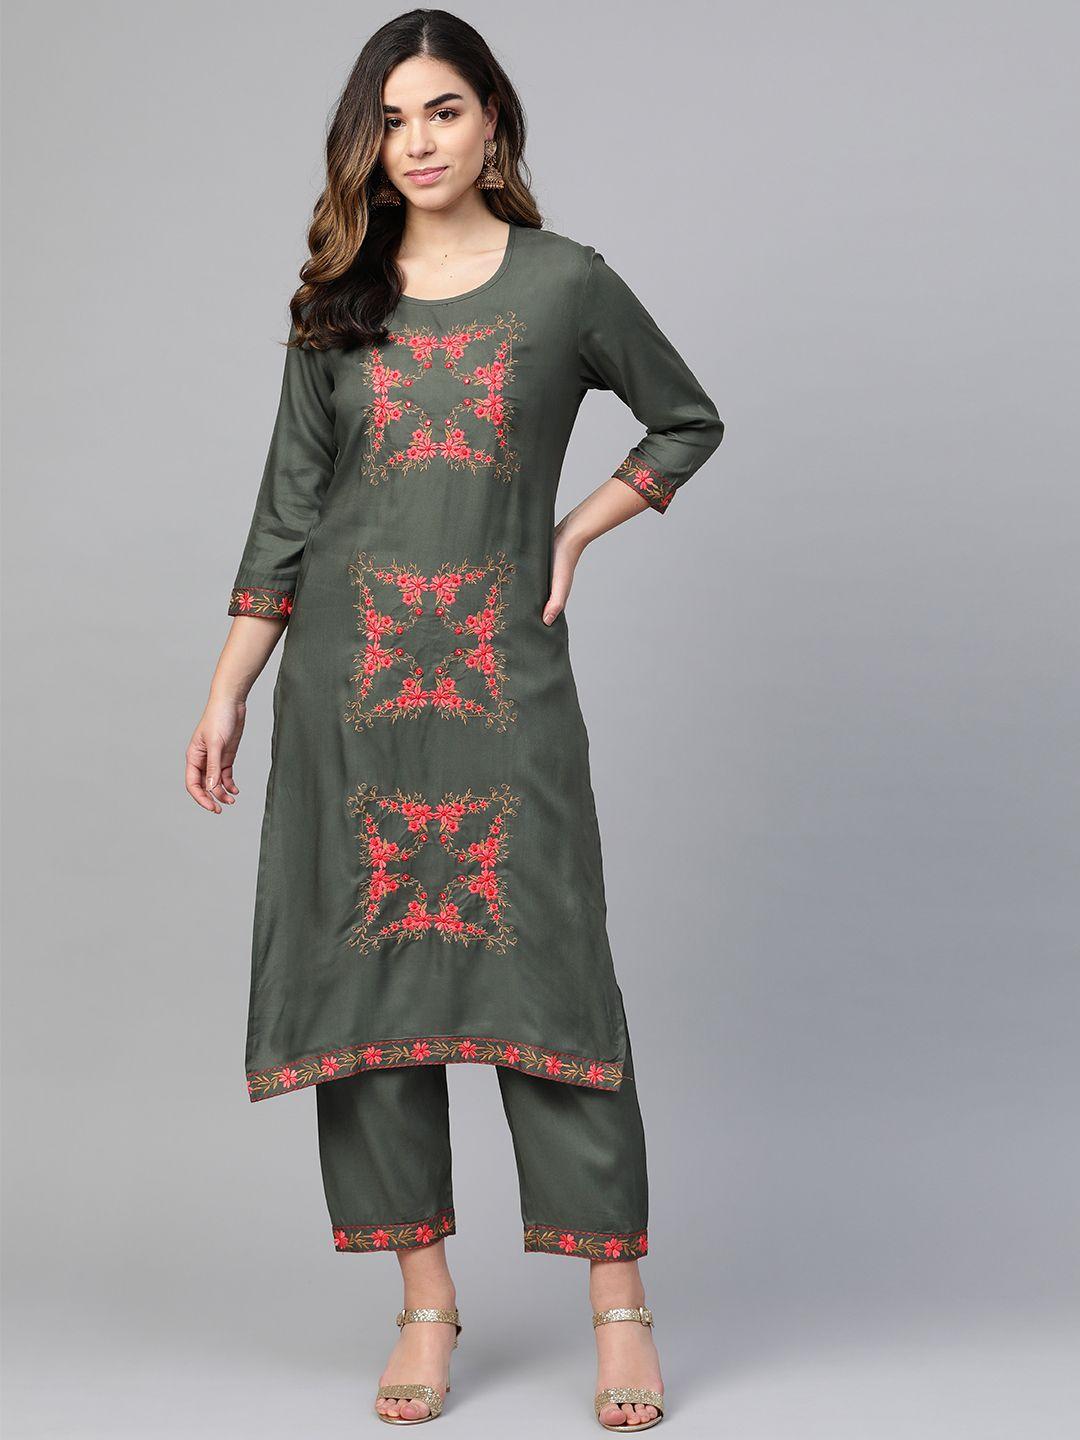 anubhutee women charcoal grey & pink embroidered kurta with trousers